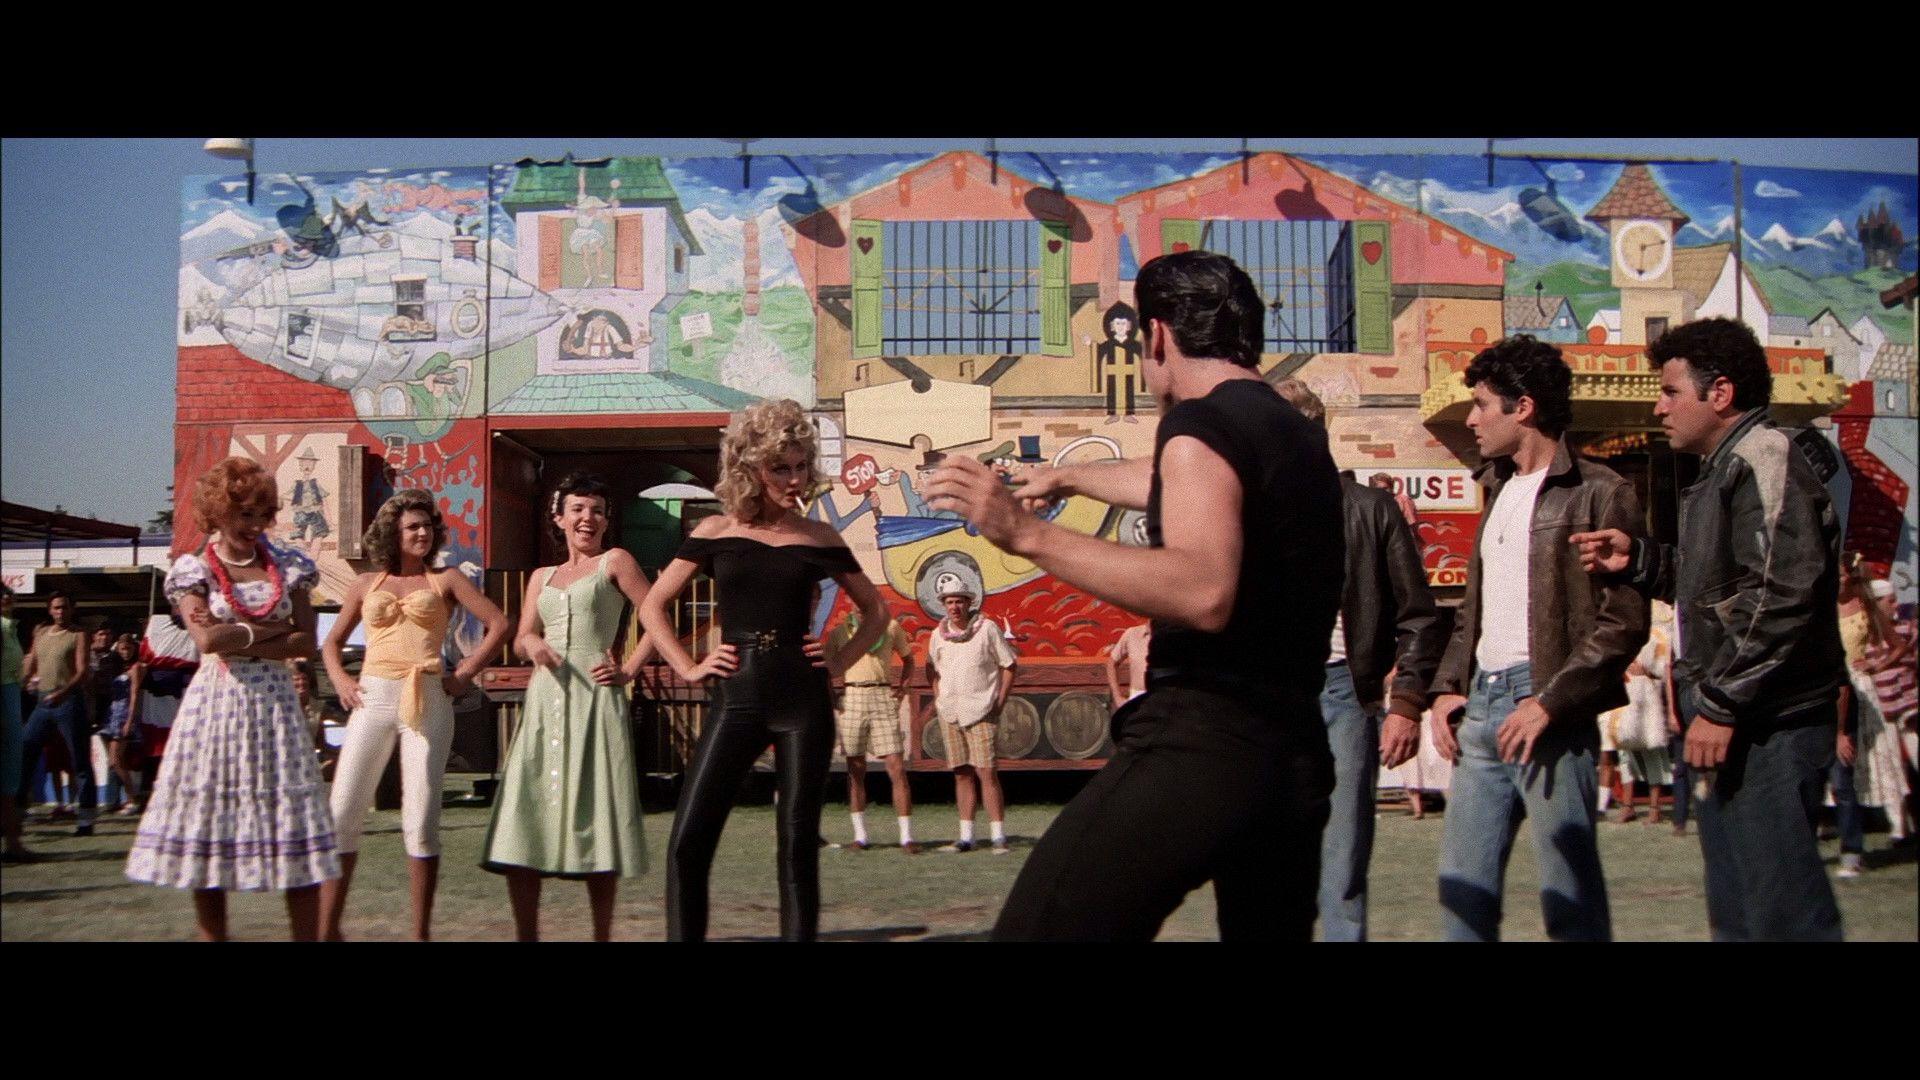 Grease Wallpaper, Custom HD 43 Grease Wallpaper Collection